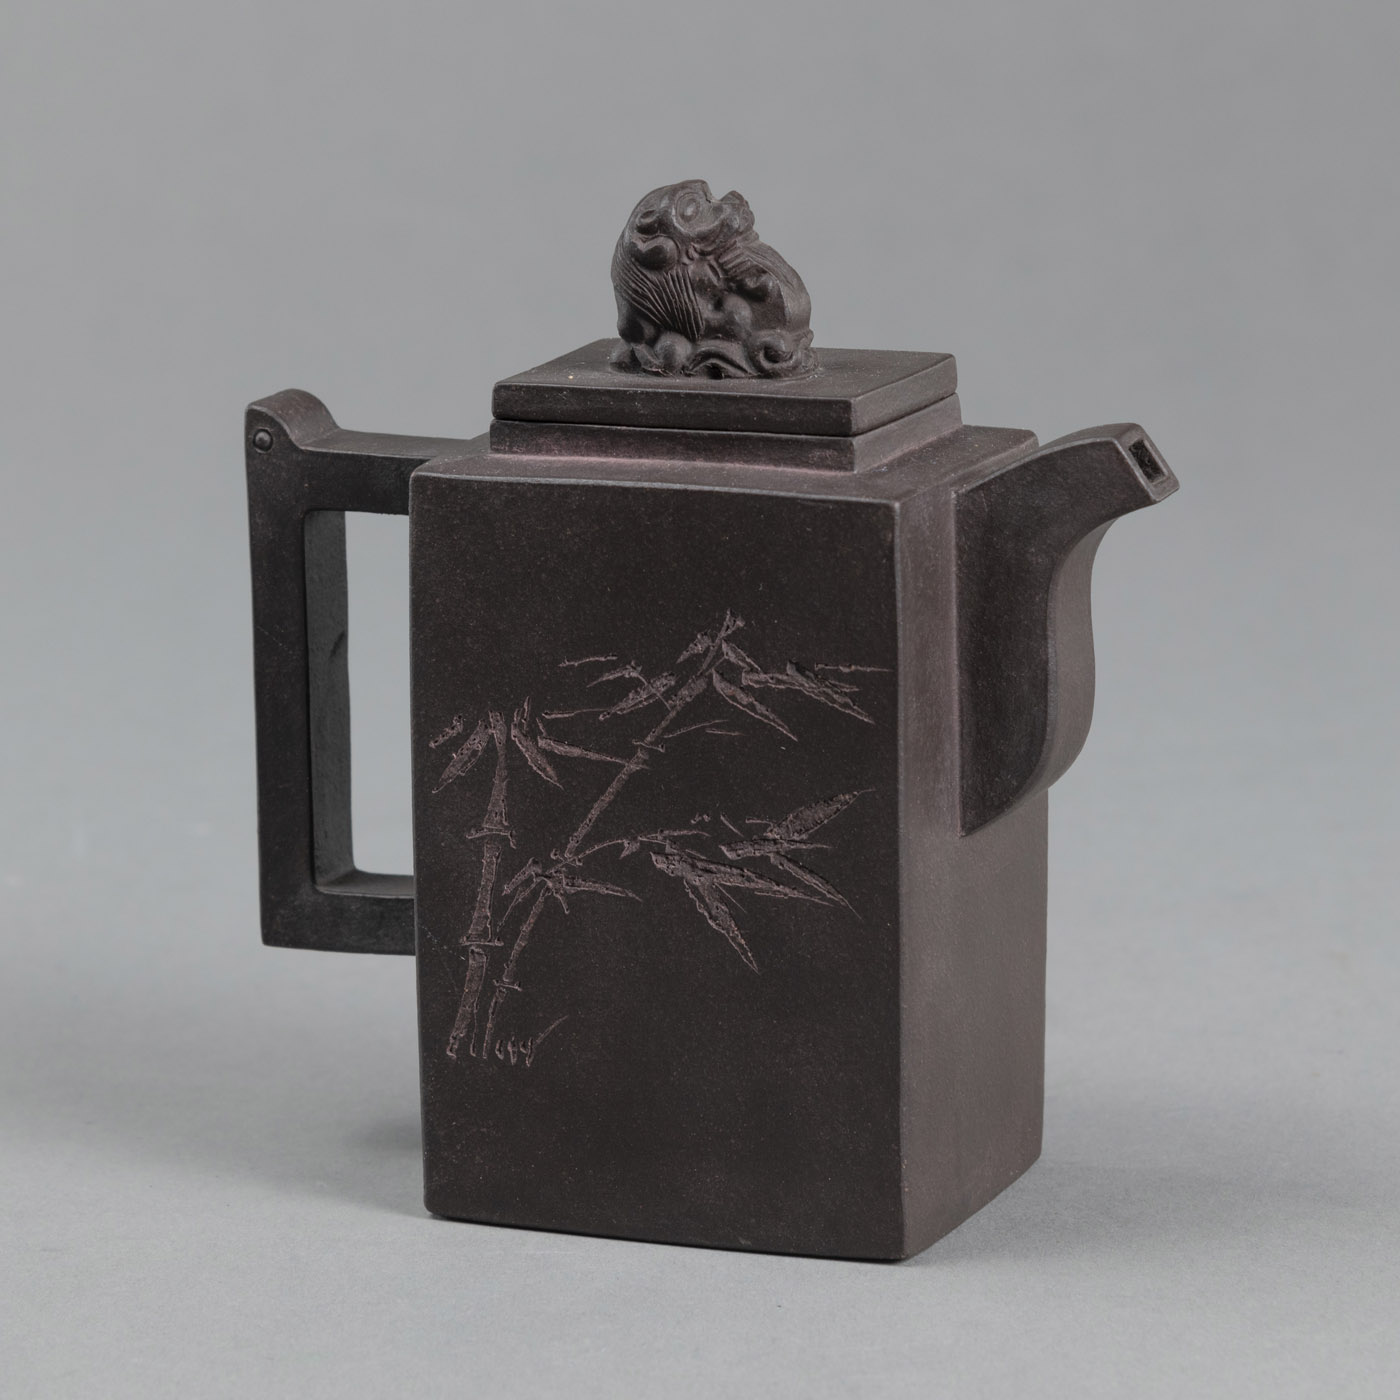 <b>A SQUQRE ZISHA TEAPOT BY LING YANQIN, ENGRAVED BAMBOO AND INSCRIPTION</b>